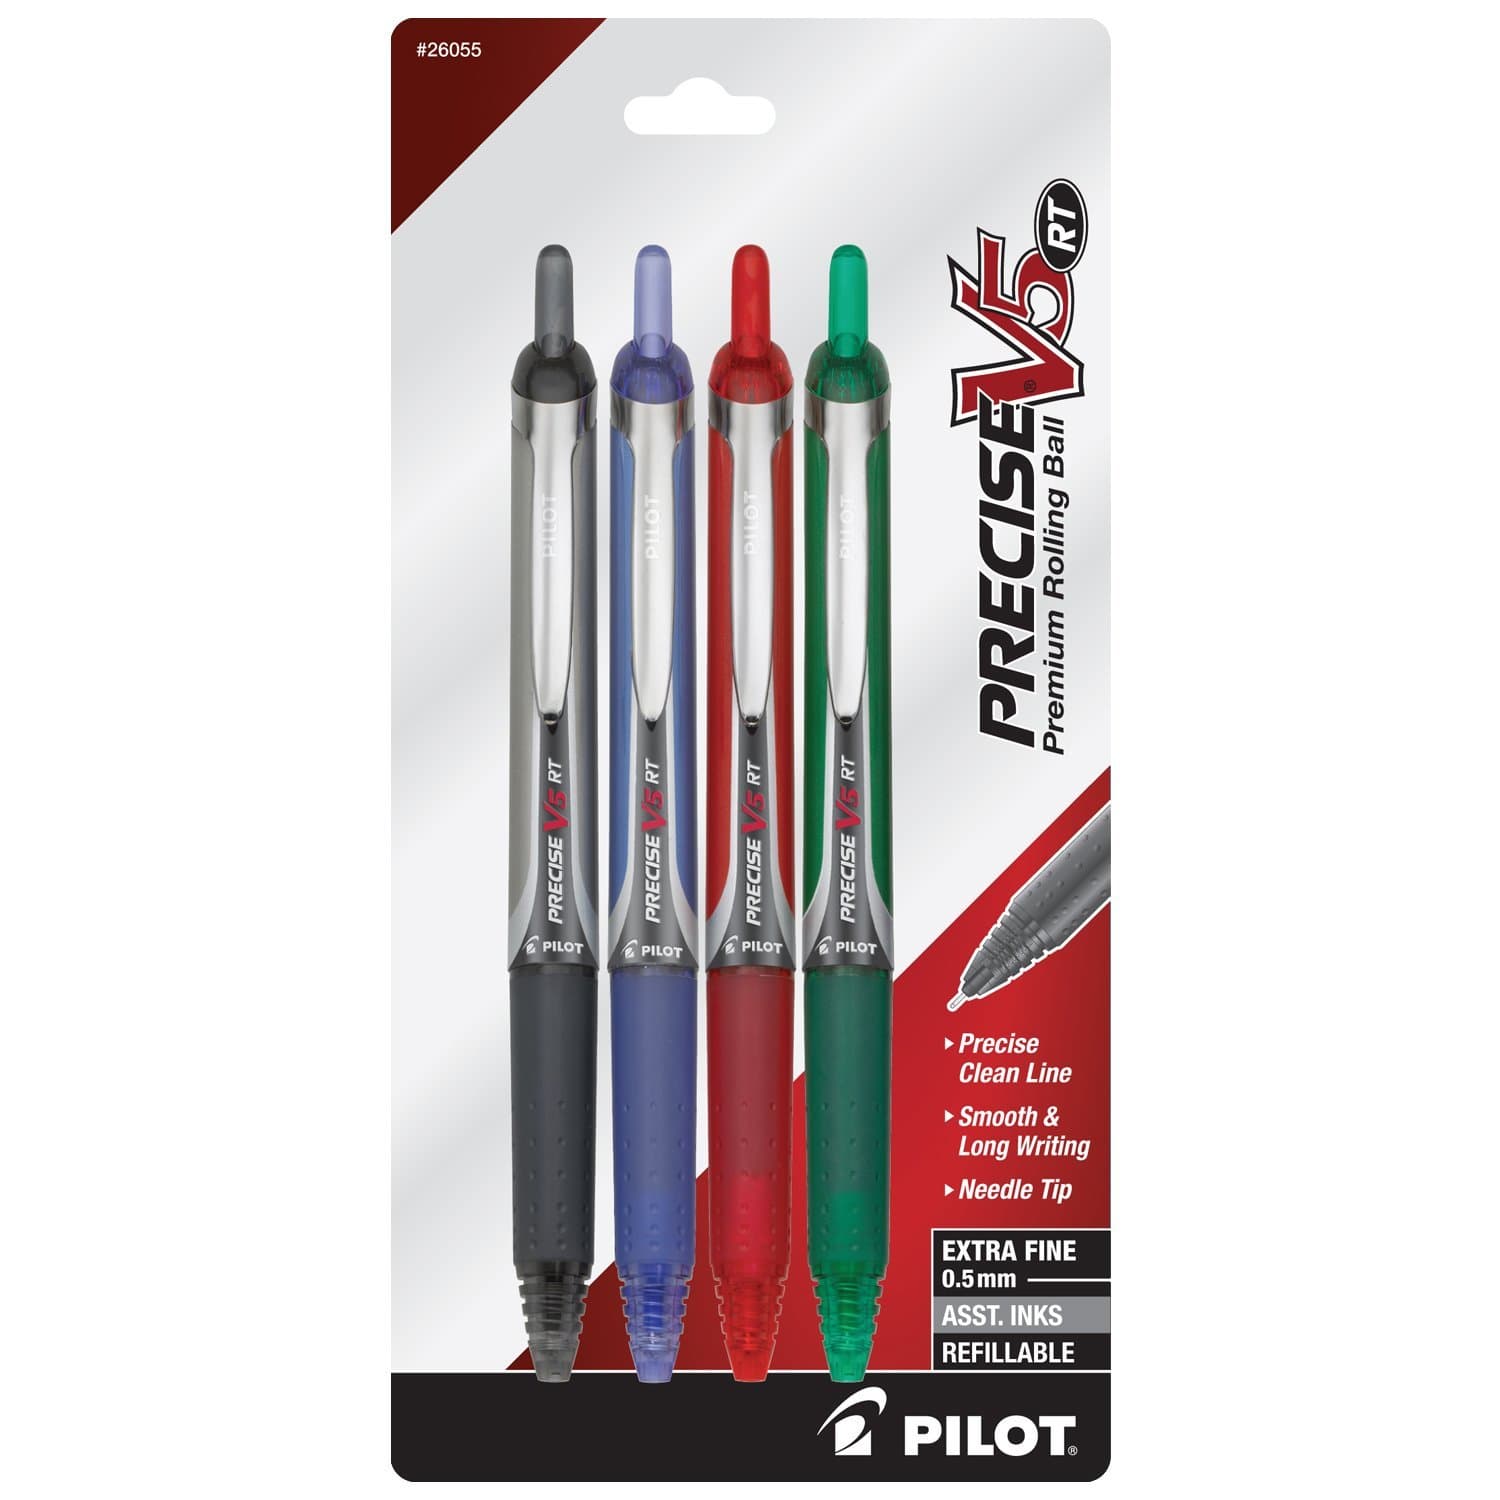 Pilot Precise V5 RT Rollerball Liquid Ink Pens in Assorted Colors